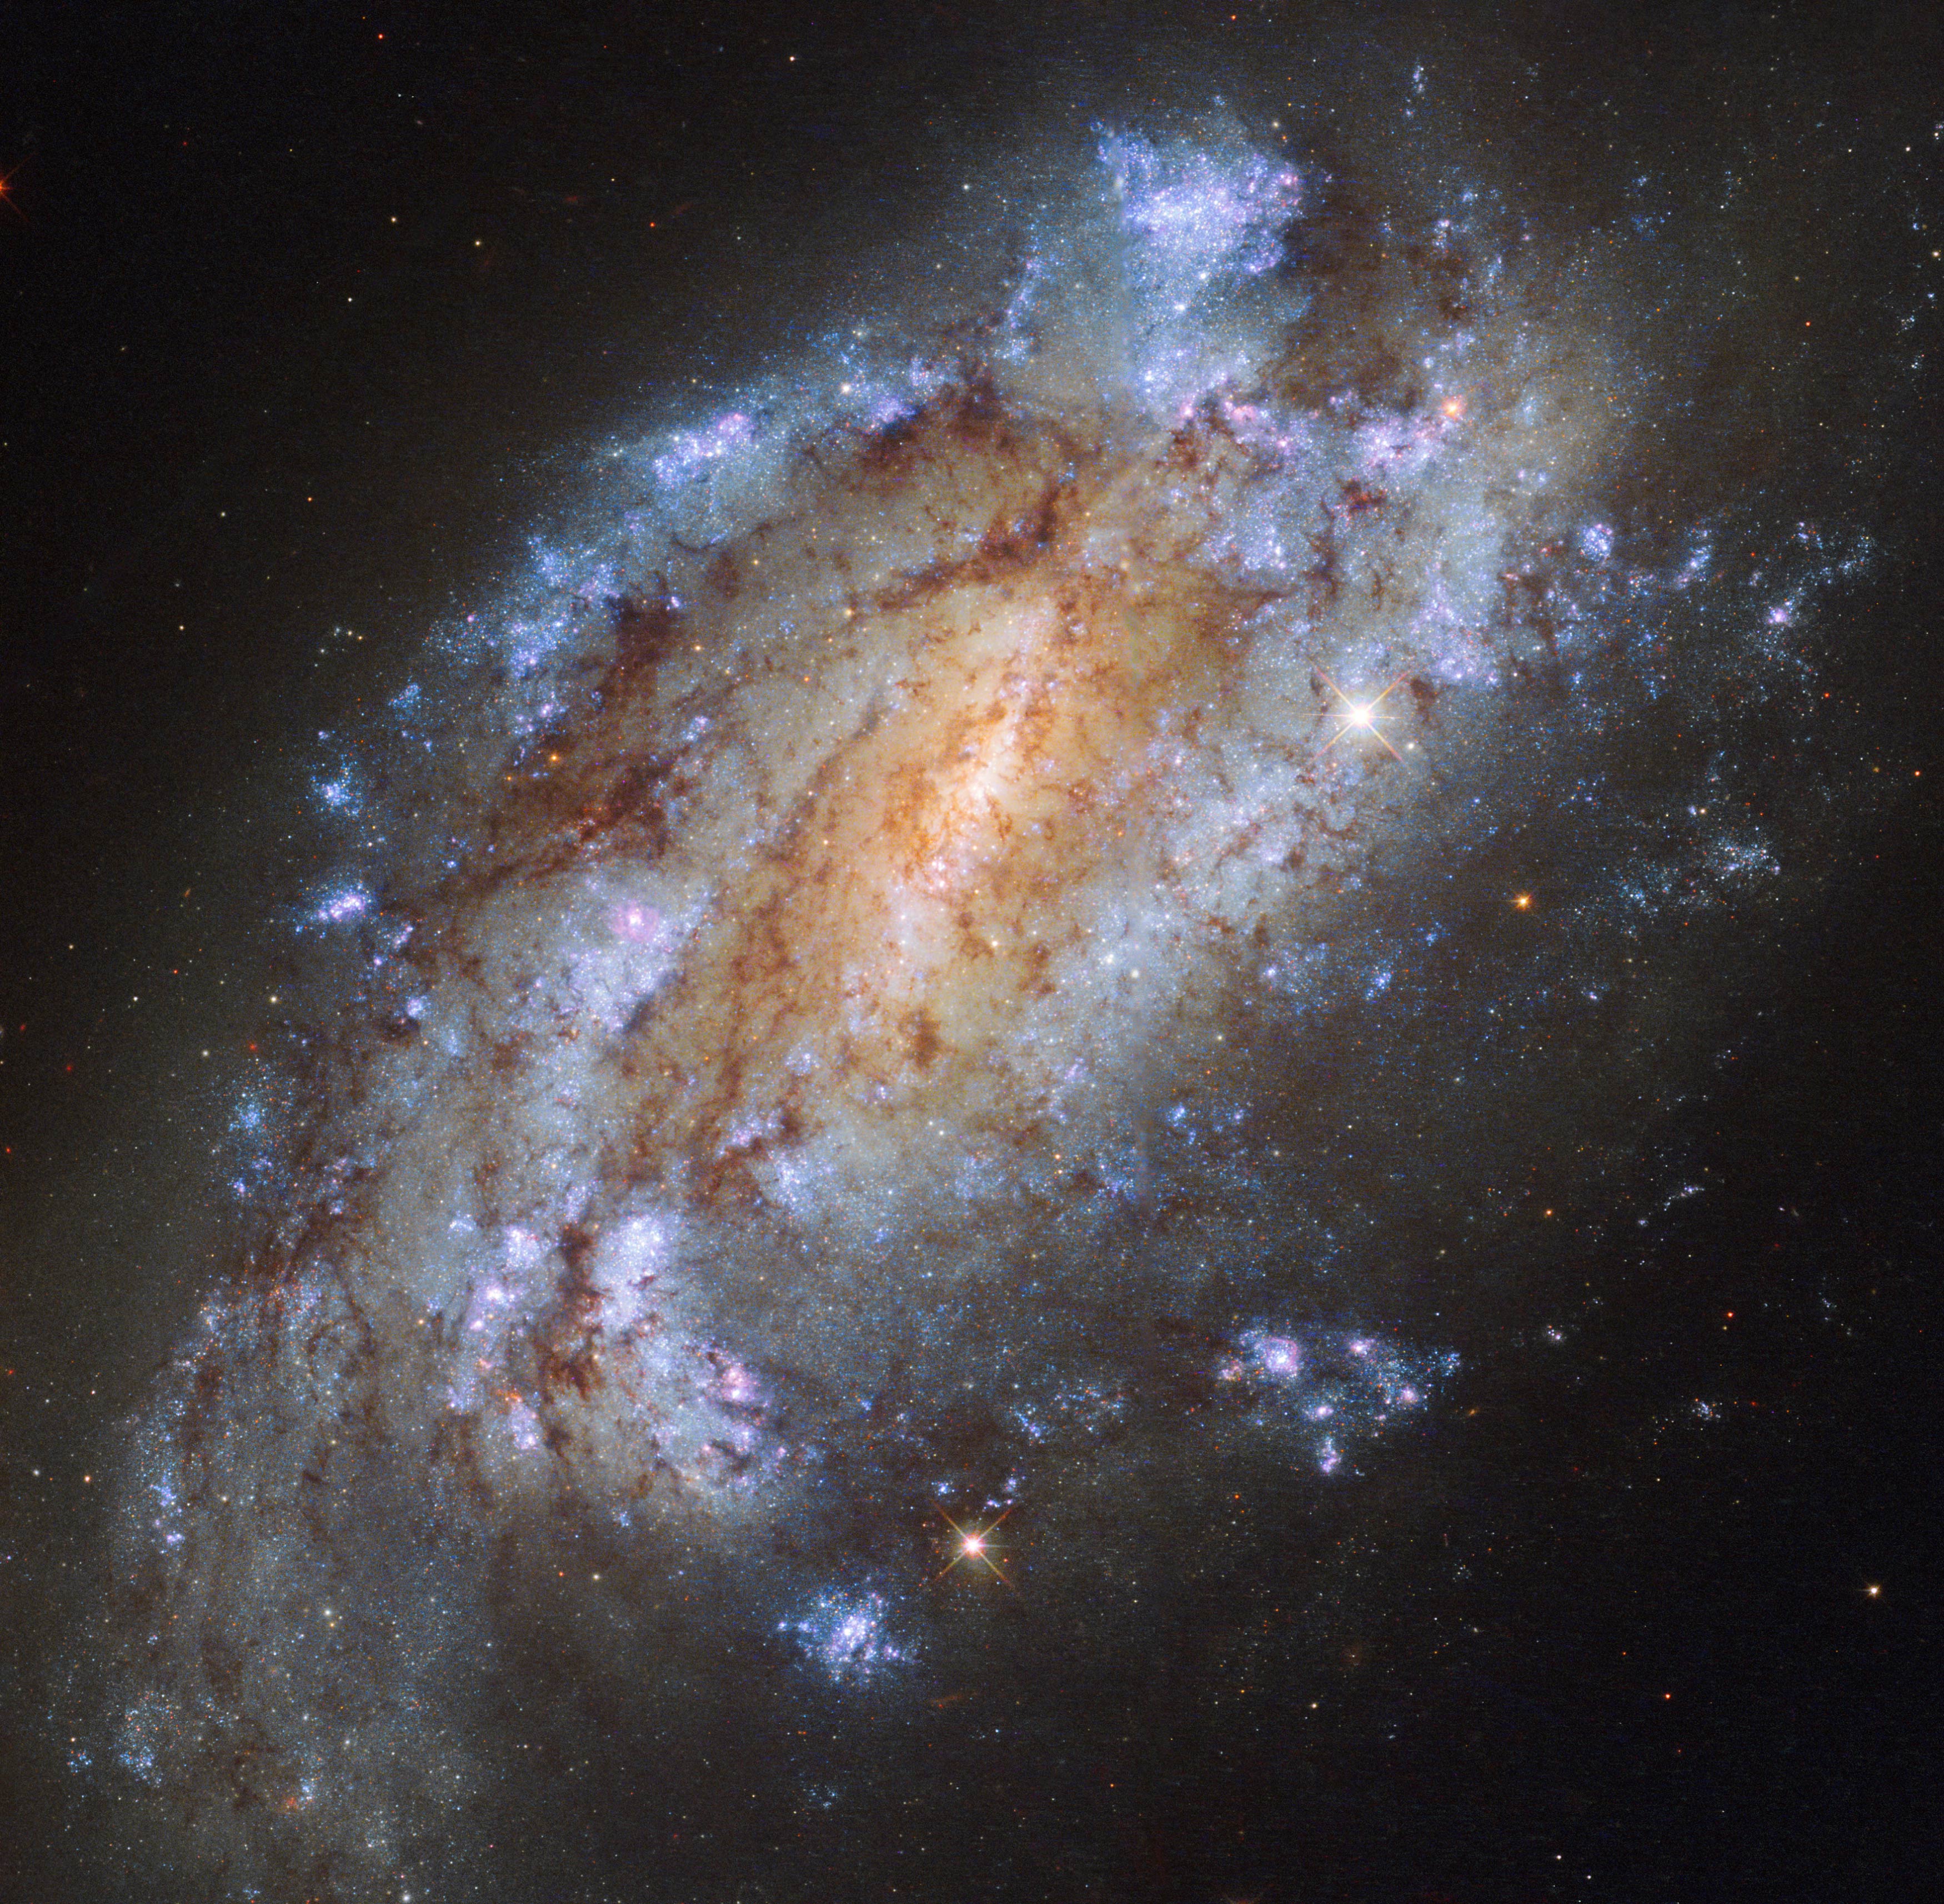 Hubble Sees Spiral Galaxy with Massive Star-Forming Arms | Astronomy ...